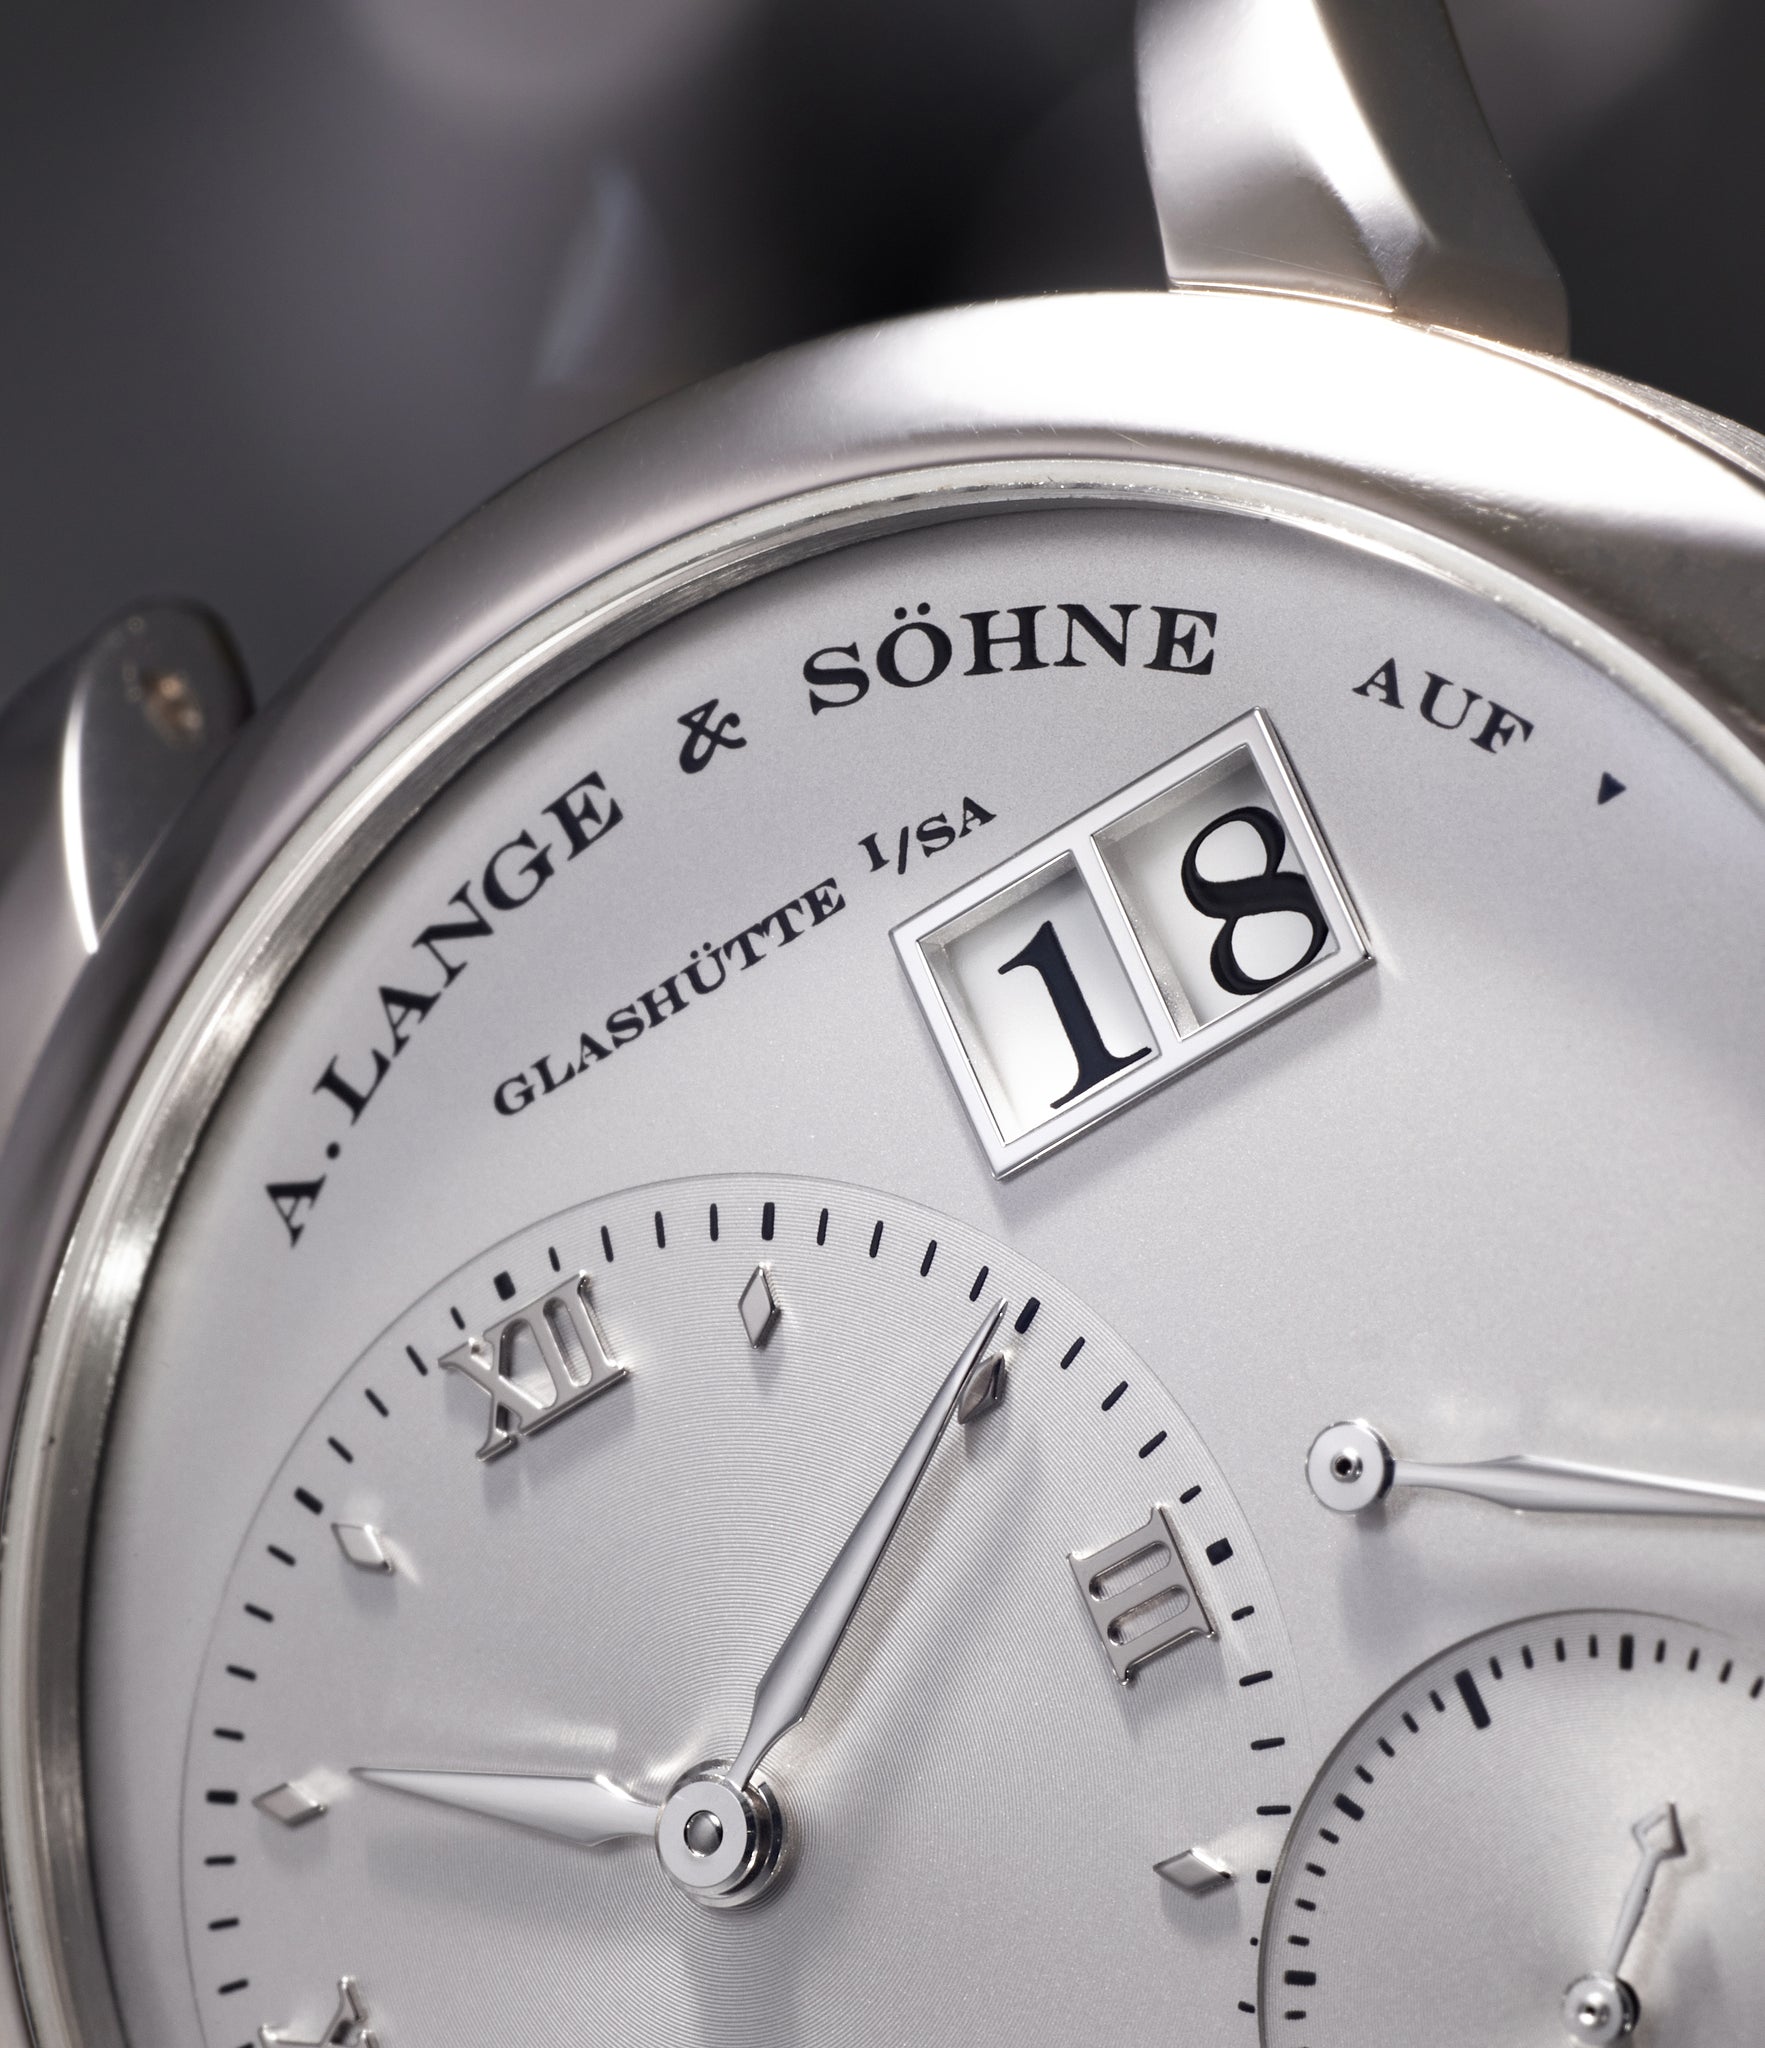 Platinum A. Lange & Söhne Lange 1 101.025  preowned watch at A Collected Man London